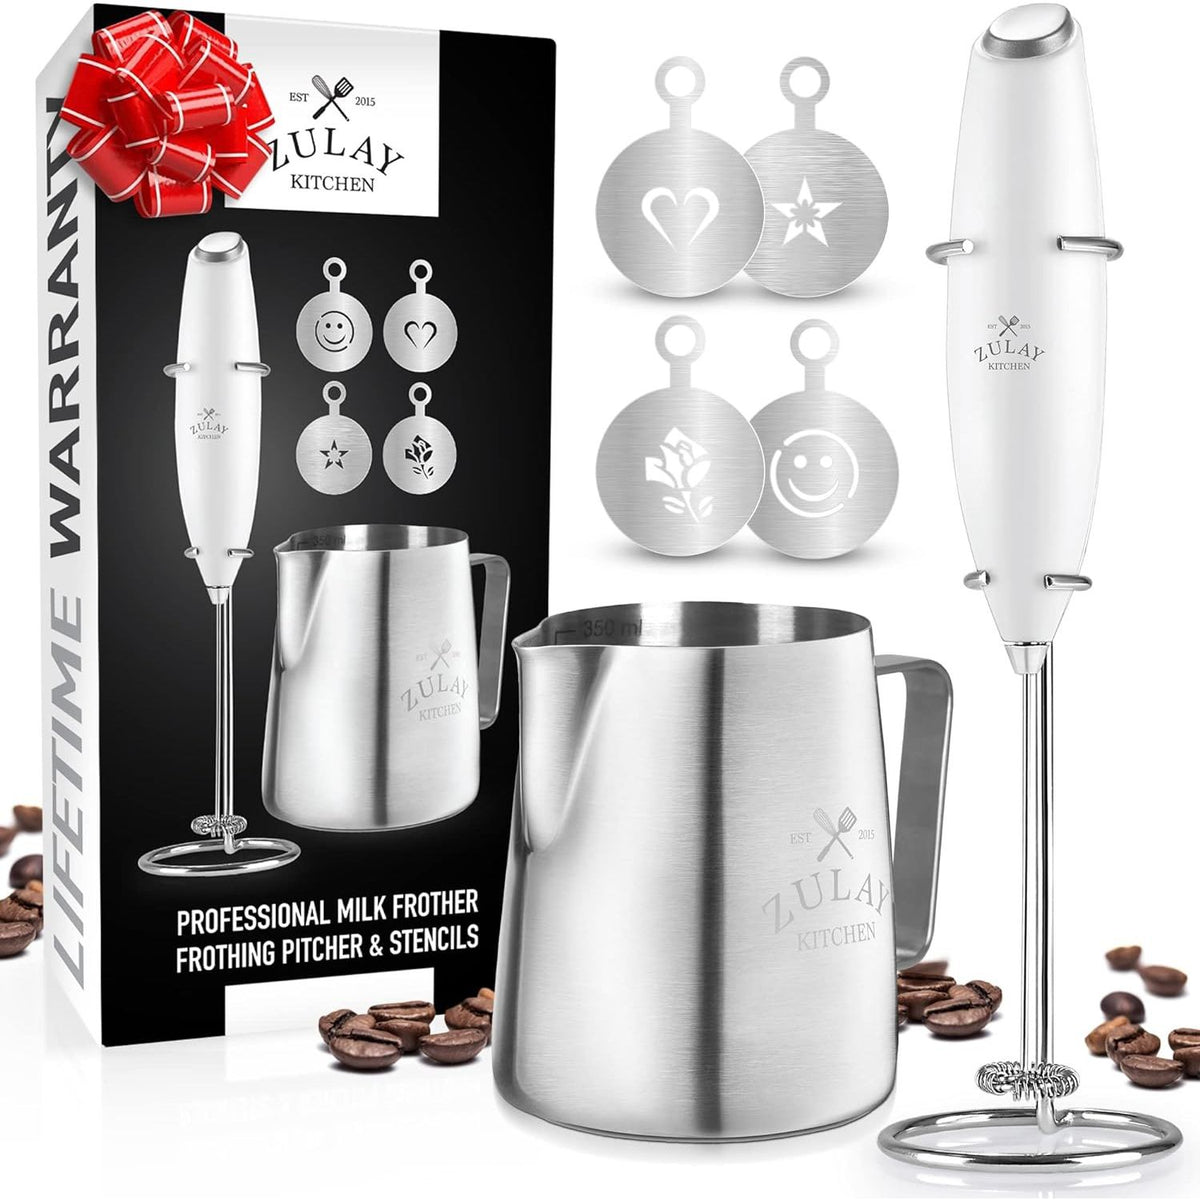 Zulay Kitchen Milk Frother With Stand (Christmas Edition) Snowman